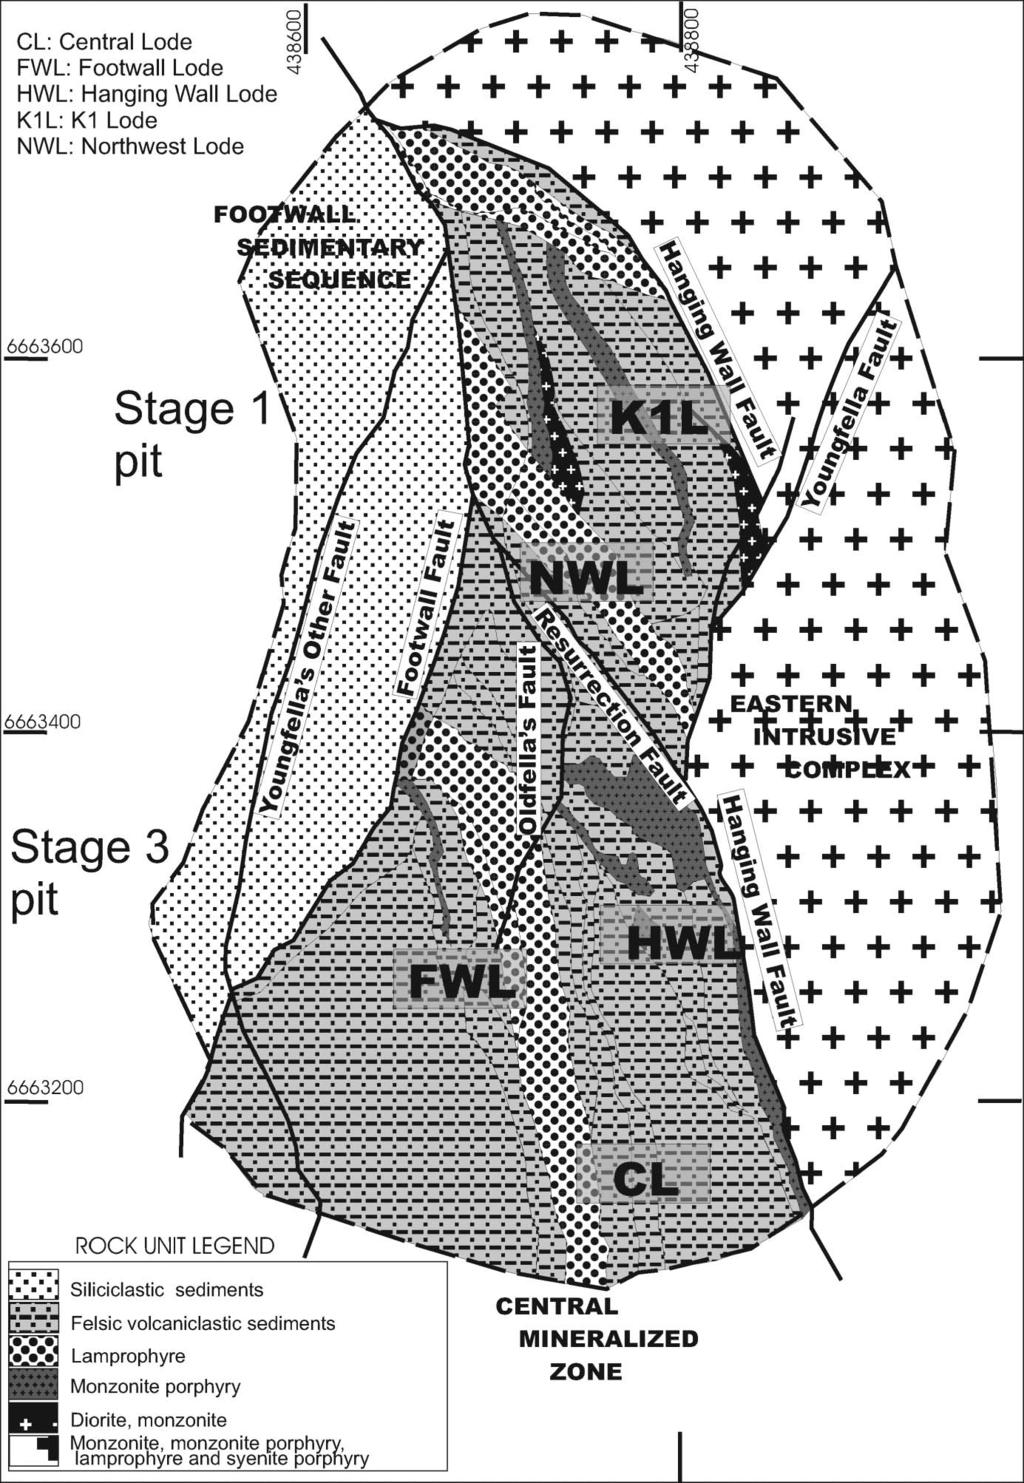 1064 W. K. Witt et al. Figure 2 Geology of the Karari pit. The northern third of the pit is referred to as the Stage 1 pit and the southern two thirds is referred to as the Stage 3 pit.